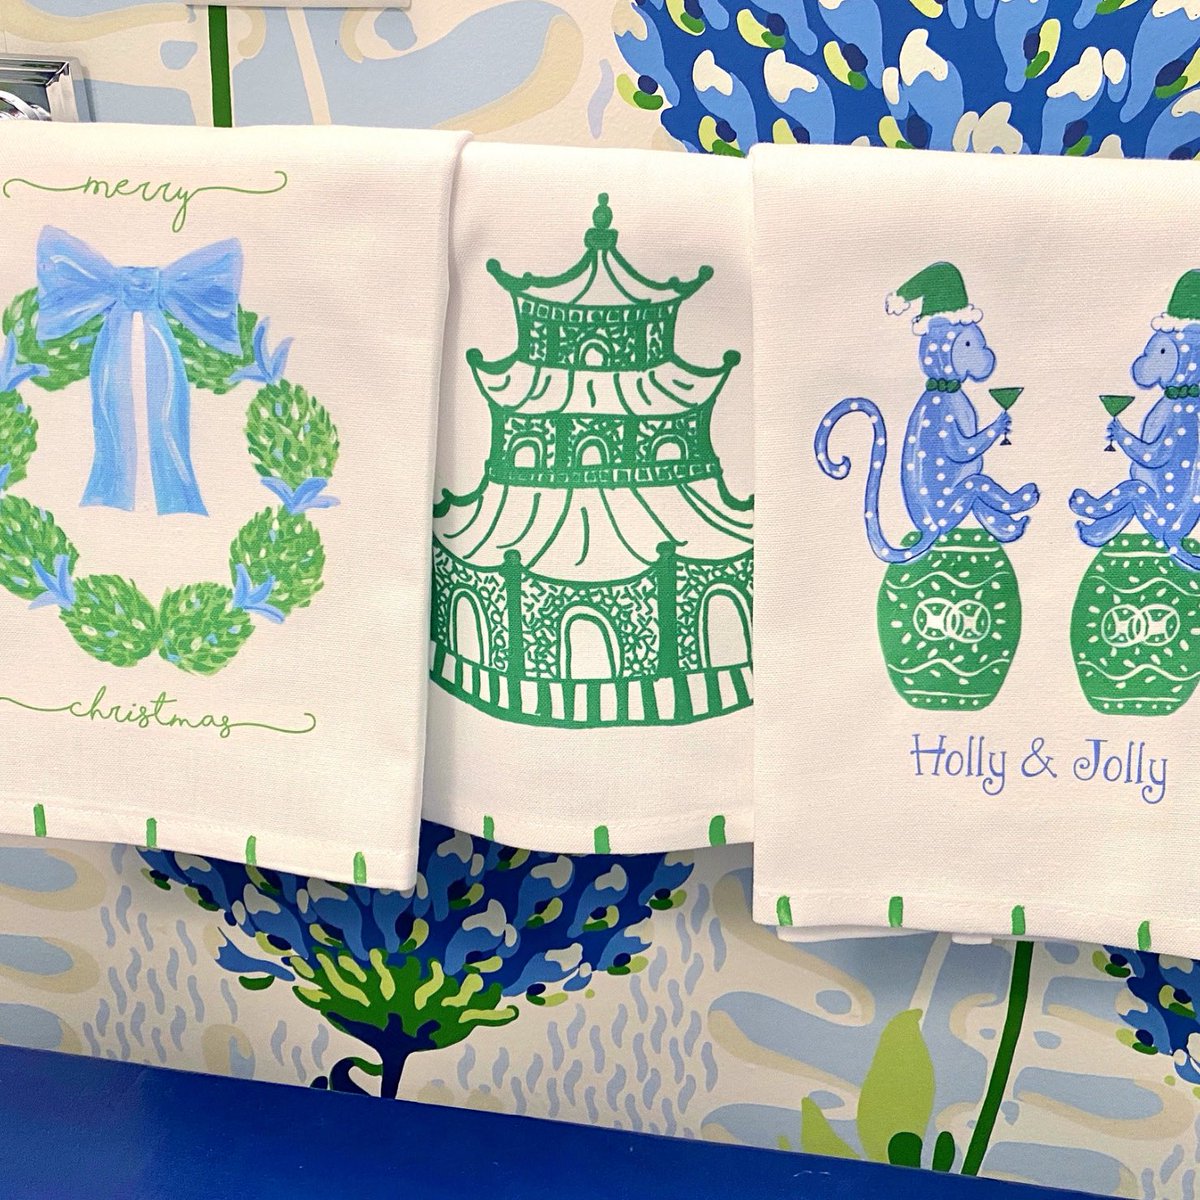 I love blue and green at Christmas (and any other time!). How about you?

#bluechristmasdecor #bluegreenchristmas #chinoiseriechristmas #chinoiseriechicstyle #thibautwallpaper #pagoda #wreath #monkeys #hollyjolly #holidayteatowels #hostessgifts #grandmillenialchristmas